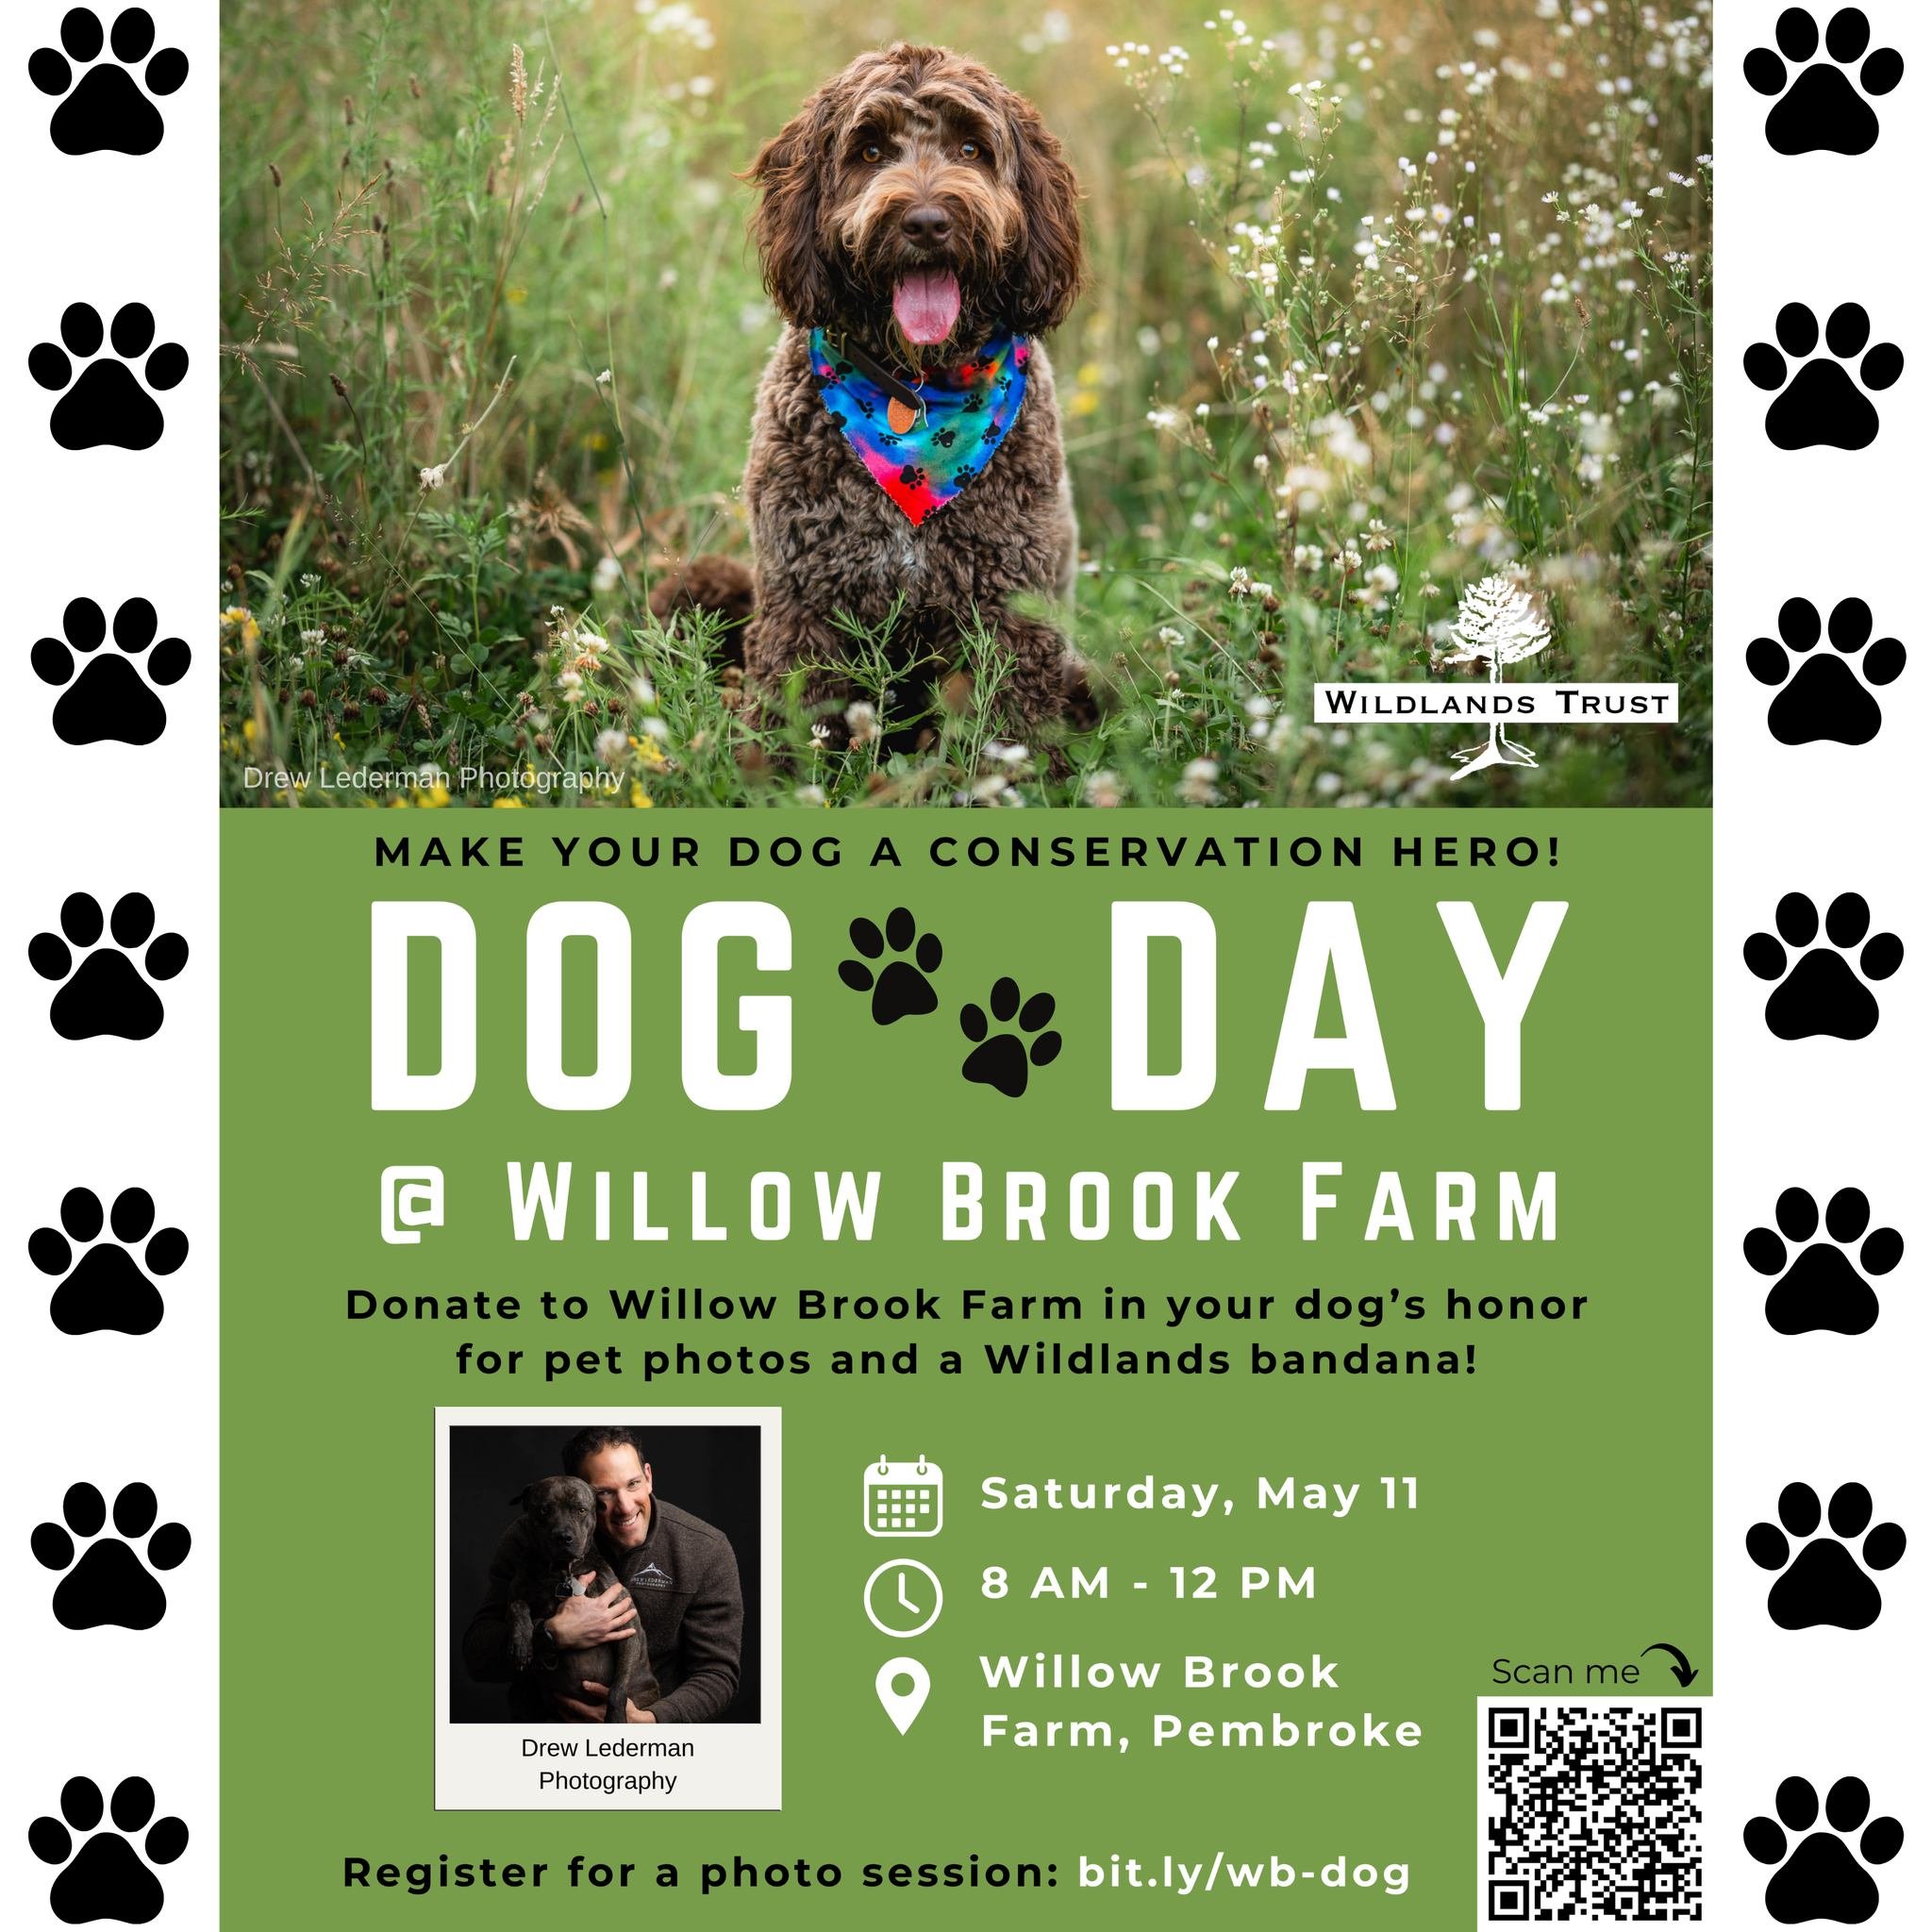 Our dogs help us discover our favorite natural places. Thank them by donating in their honor to Willow Brook Farm! 🐶🌲

On 𝐒𝐚𝐭𝐮𝐫𝐝𝐚𝐲, 𝐌𝐚𝐲 𝟏𝟏, join us for Dog Day at Willow Brook Farm! When you donate $50 or more to our Willow Brook Farm 